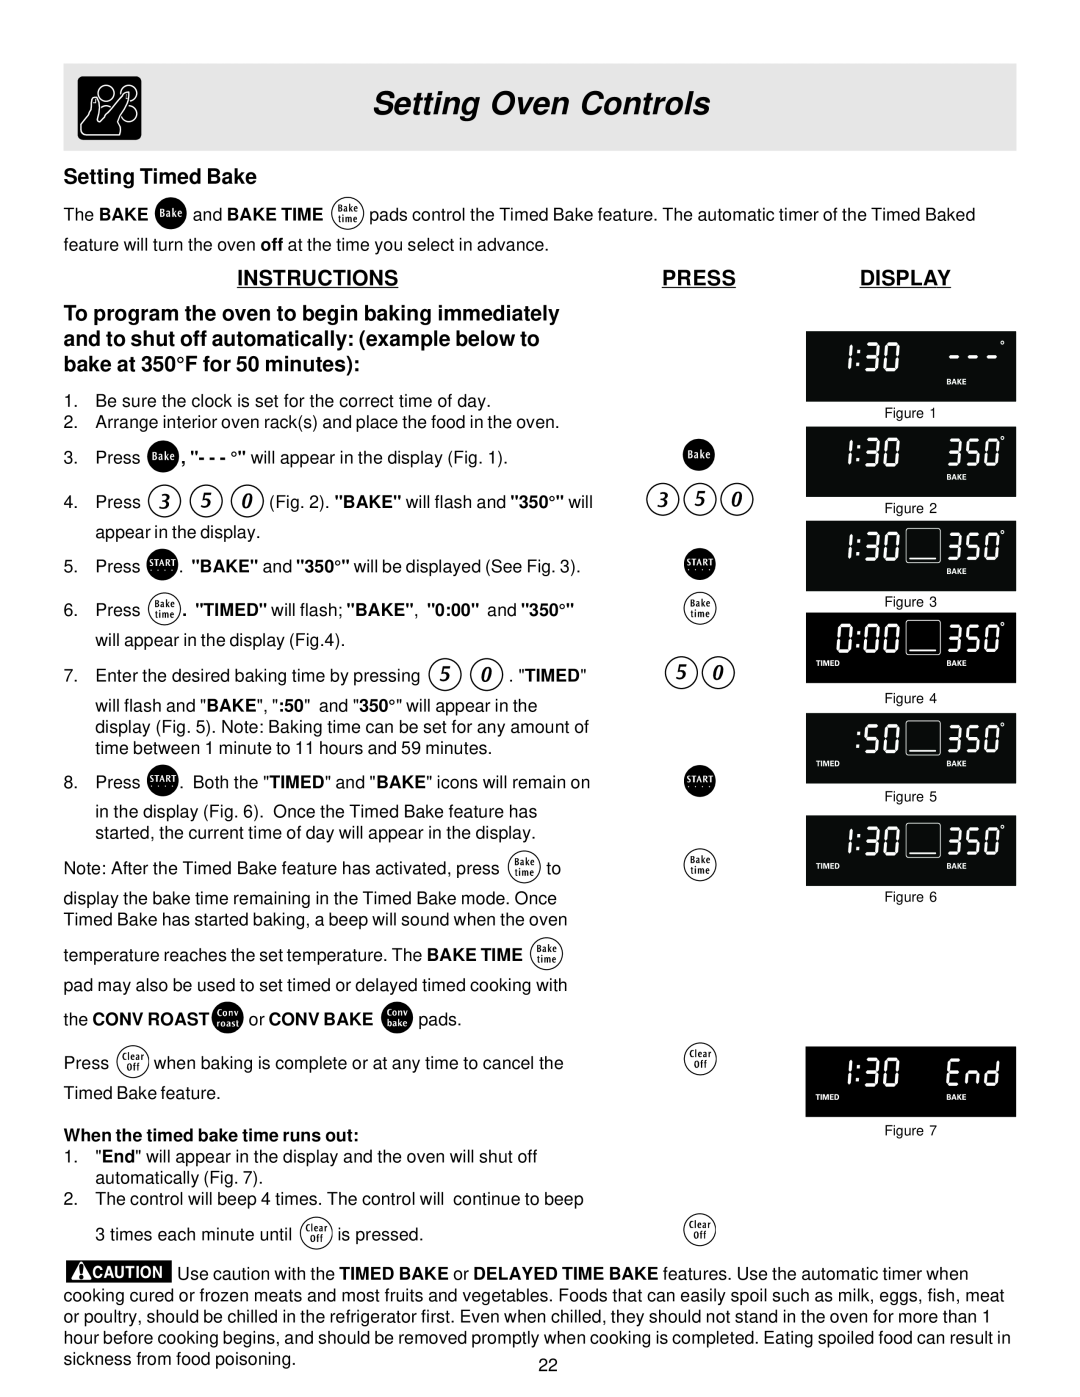 Frigidaire ES40 Setting Timed Bake, Setting Oven Controls, Instructions, Press, Display, the CONV ROAST or CONV BAKE pads 